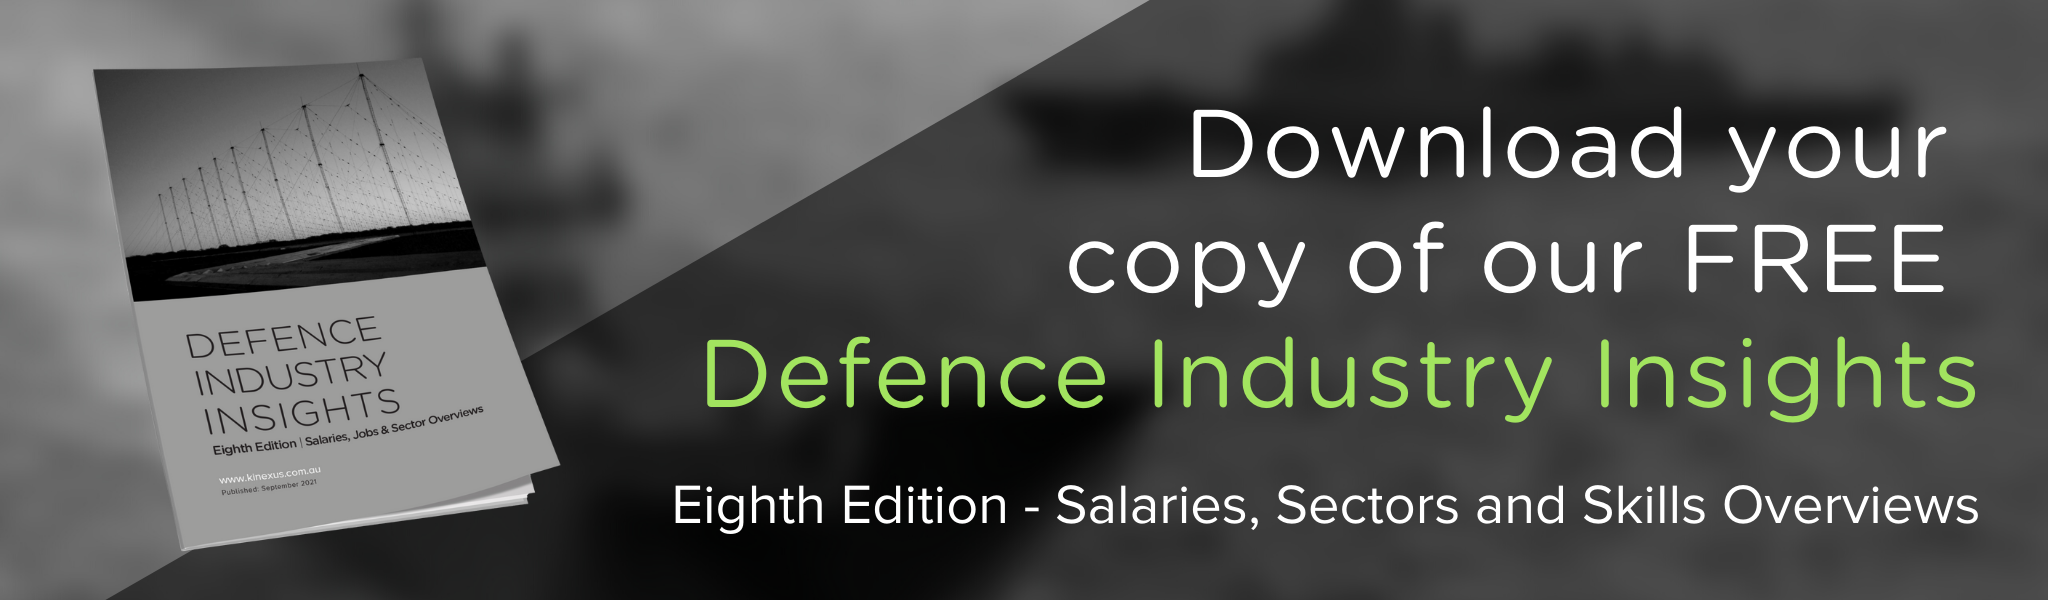 Defence Industry Insights | Eighth Edition download banner 